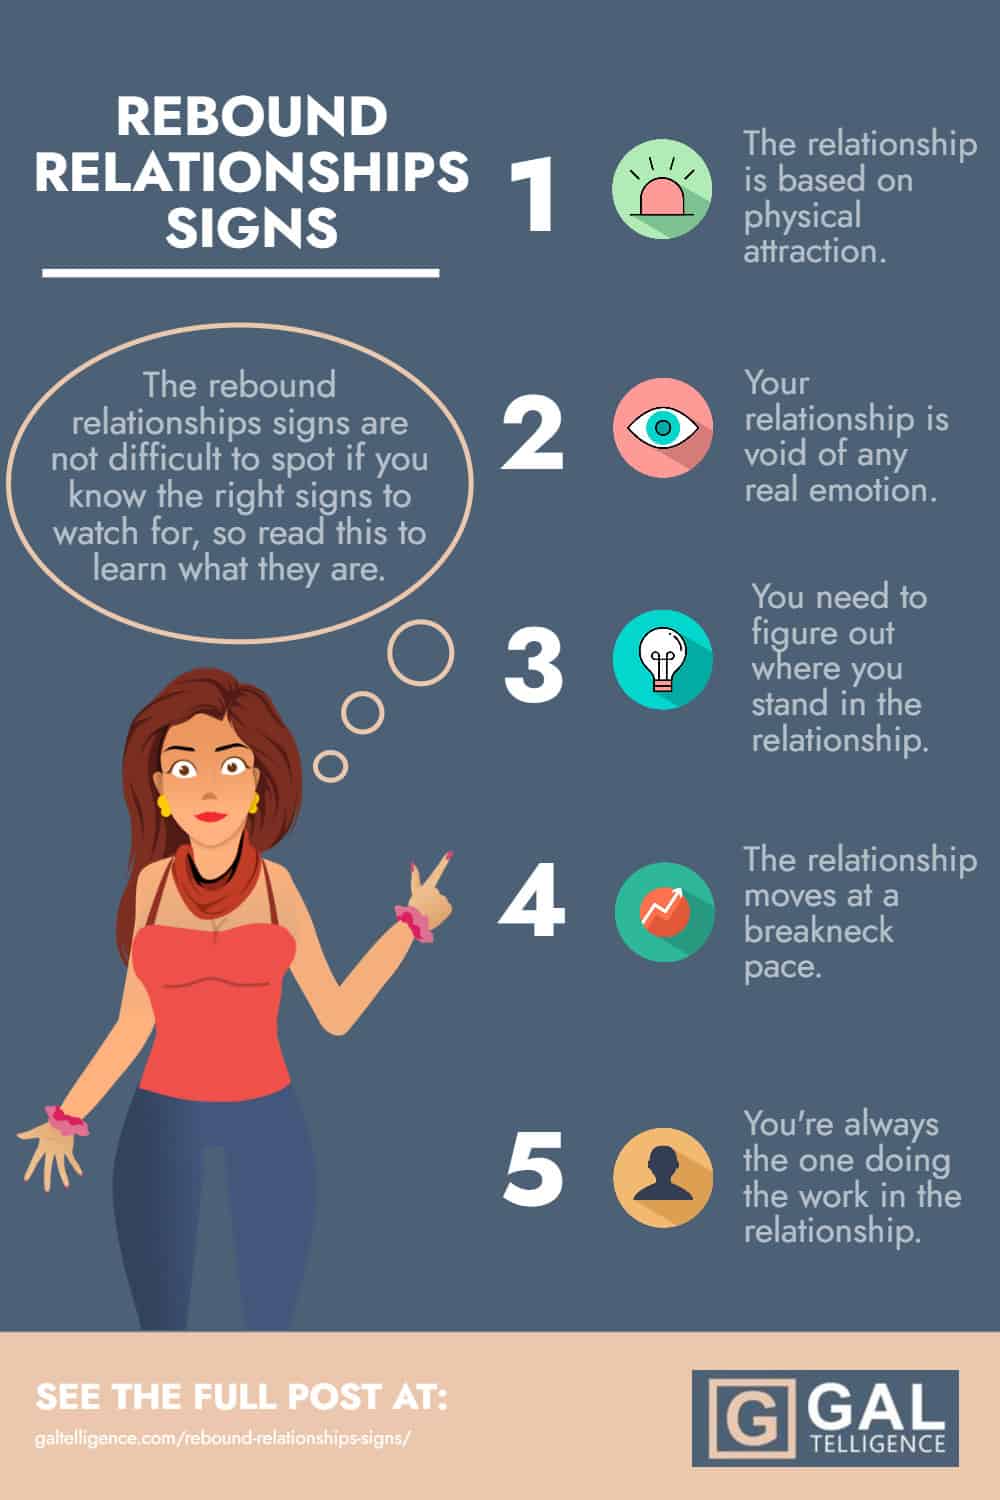 Rebound relationships signs - Infographic